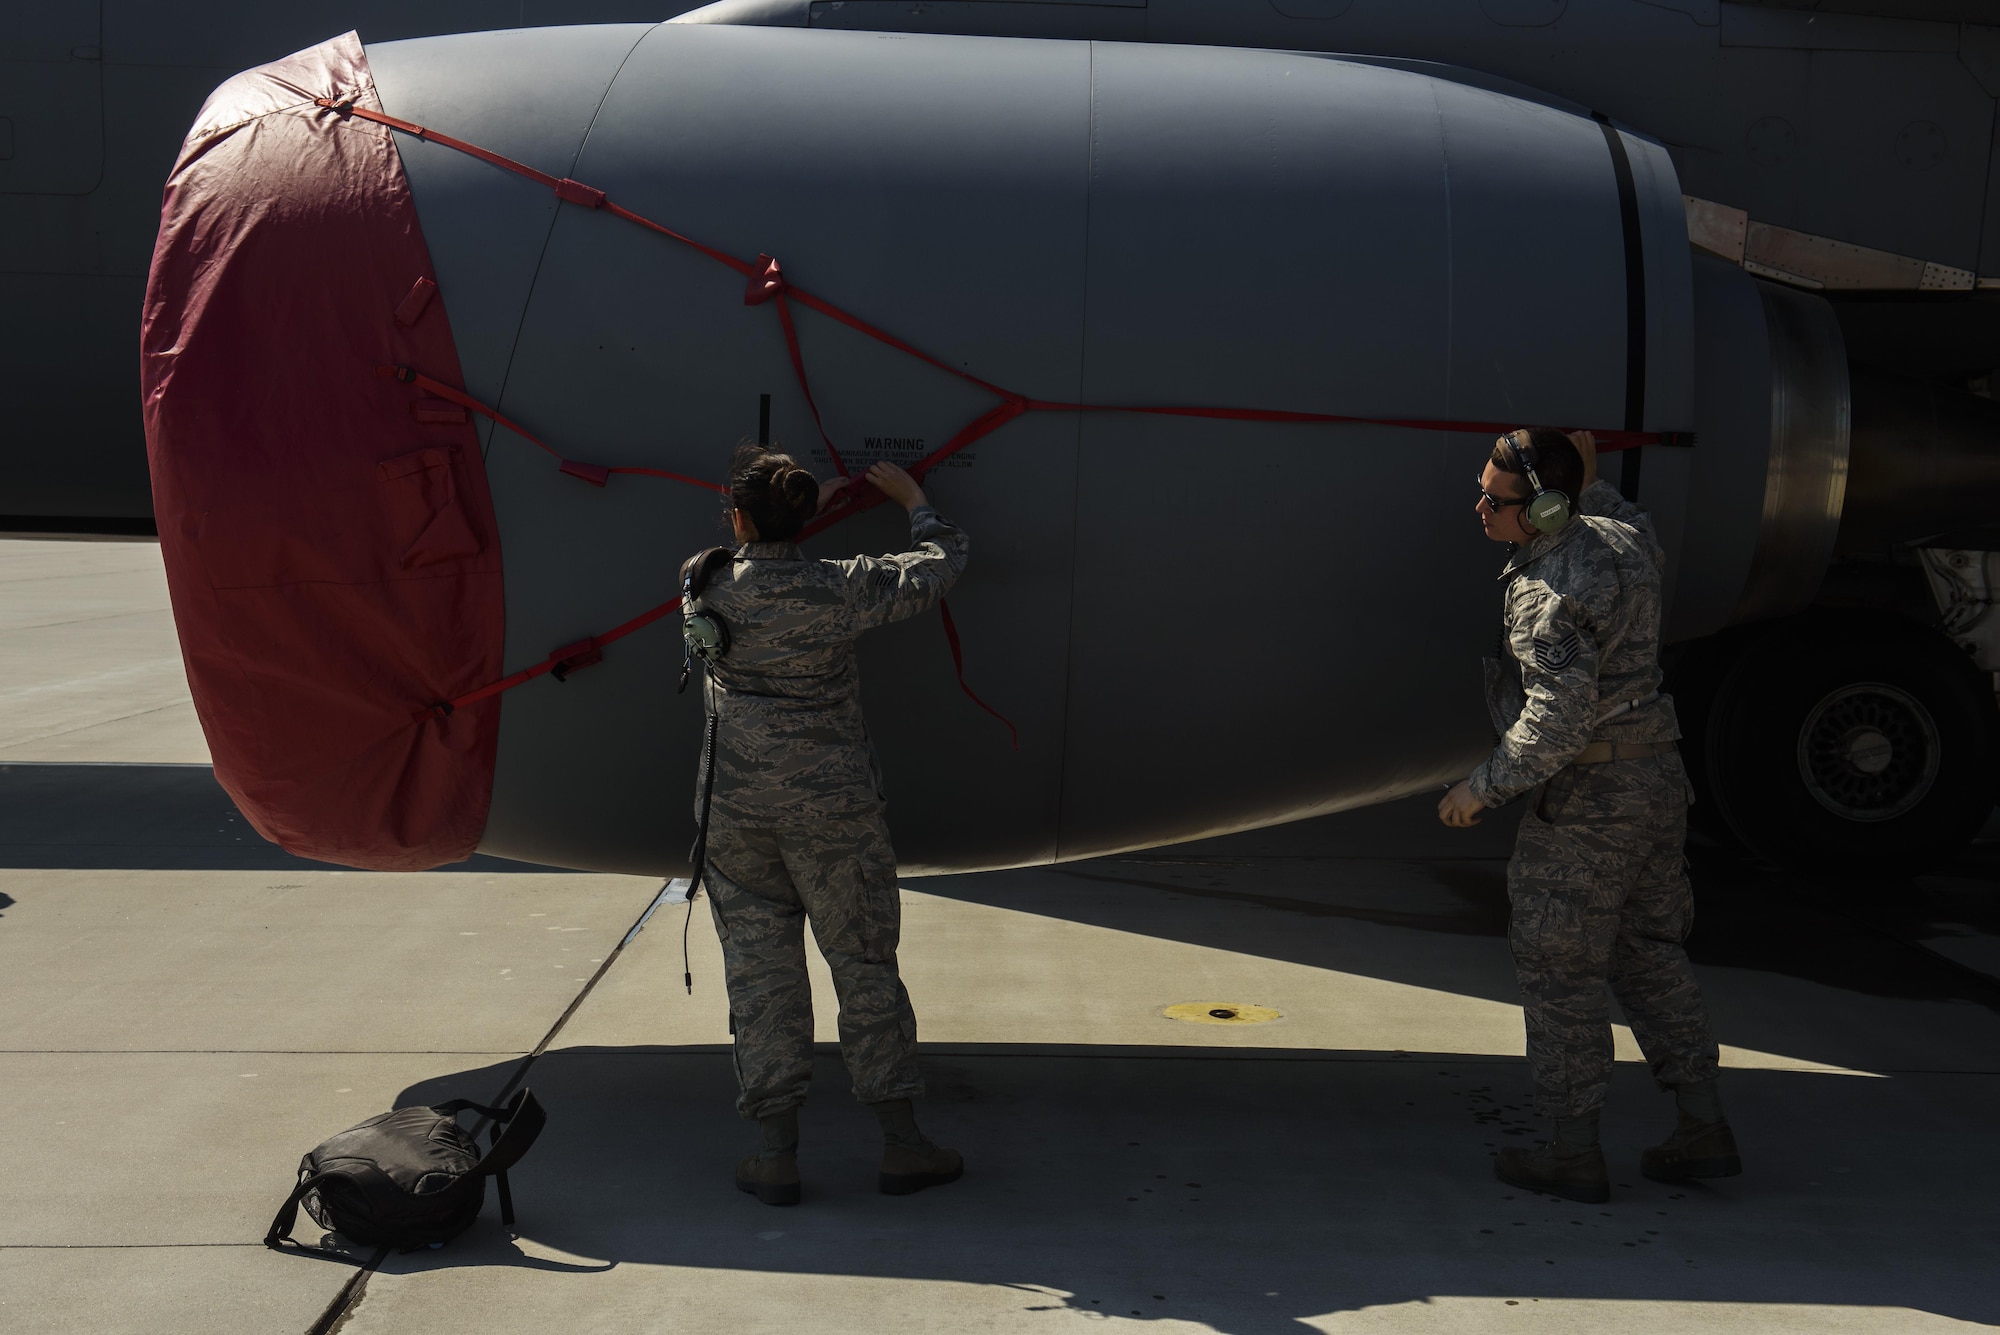 Staff Sgt Sandra Henriquez, left, 459th Aircraft Maintenance Squadron aero repair, and Tech. Sgt. Aaron Frank, right, 459th Aircraft Maintenance Squadron avionics comm/nav technician, both are part of the Total Force Citizen Airmen team puts the covers over a KC-135R Stratotanker engine during BALTOPS exercise at Powidz Air Base, Poland, June 12, 2017. The exercise is designed to enhance flexibility and interoperability, to strengthen combined response capabilities, as well as demonstrate resolve among Allied and Partner Nations' forces to ensure stability in, and if necessary defend, the Baltic Sea region. (U.S. Air Force photo by Staff Sgt. Jonathan Snyder)